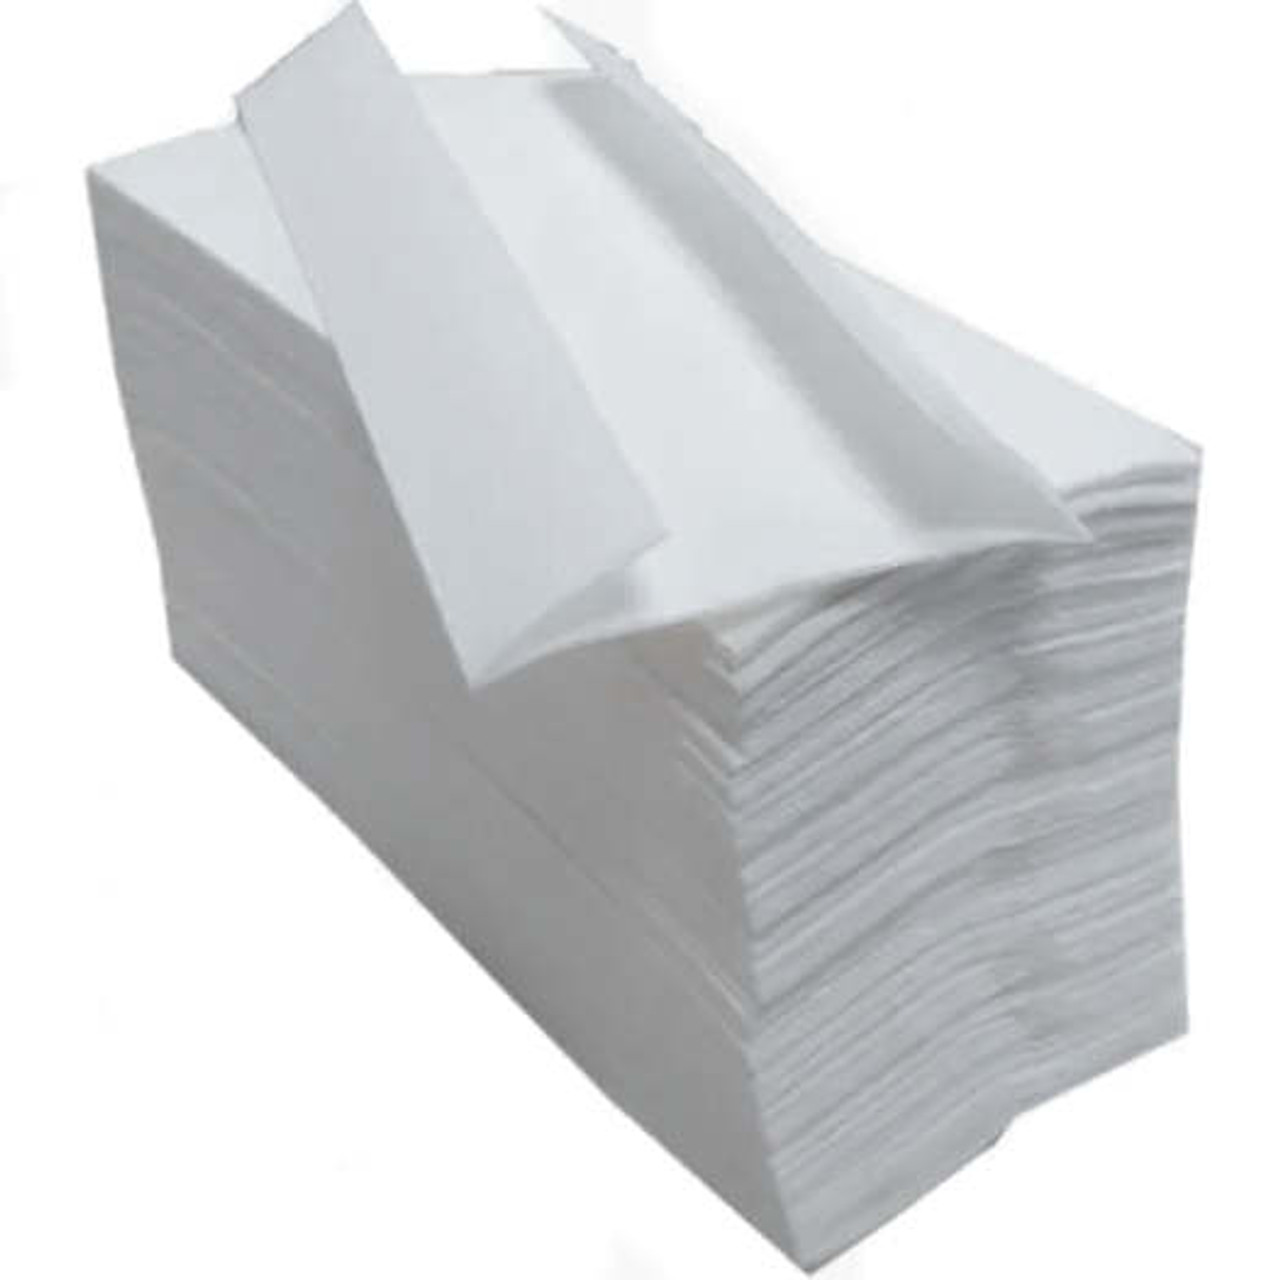 Pack of C Fold individual 2 ply white paper towels